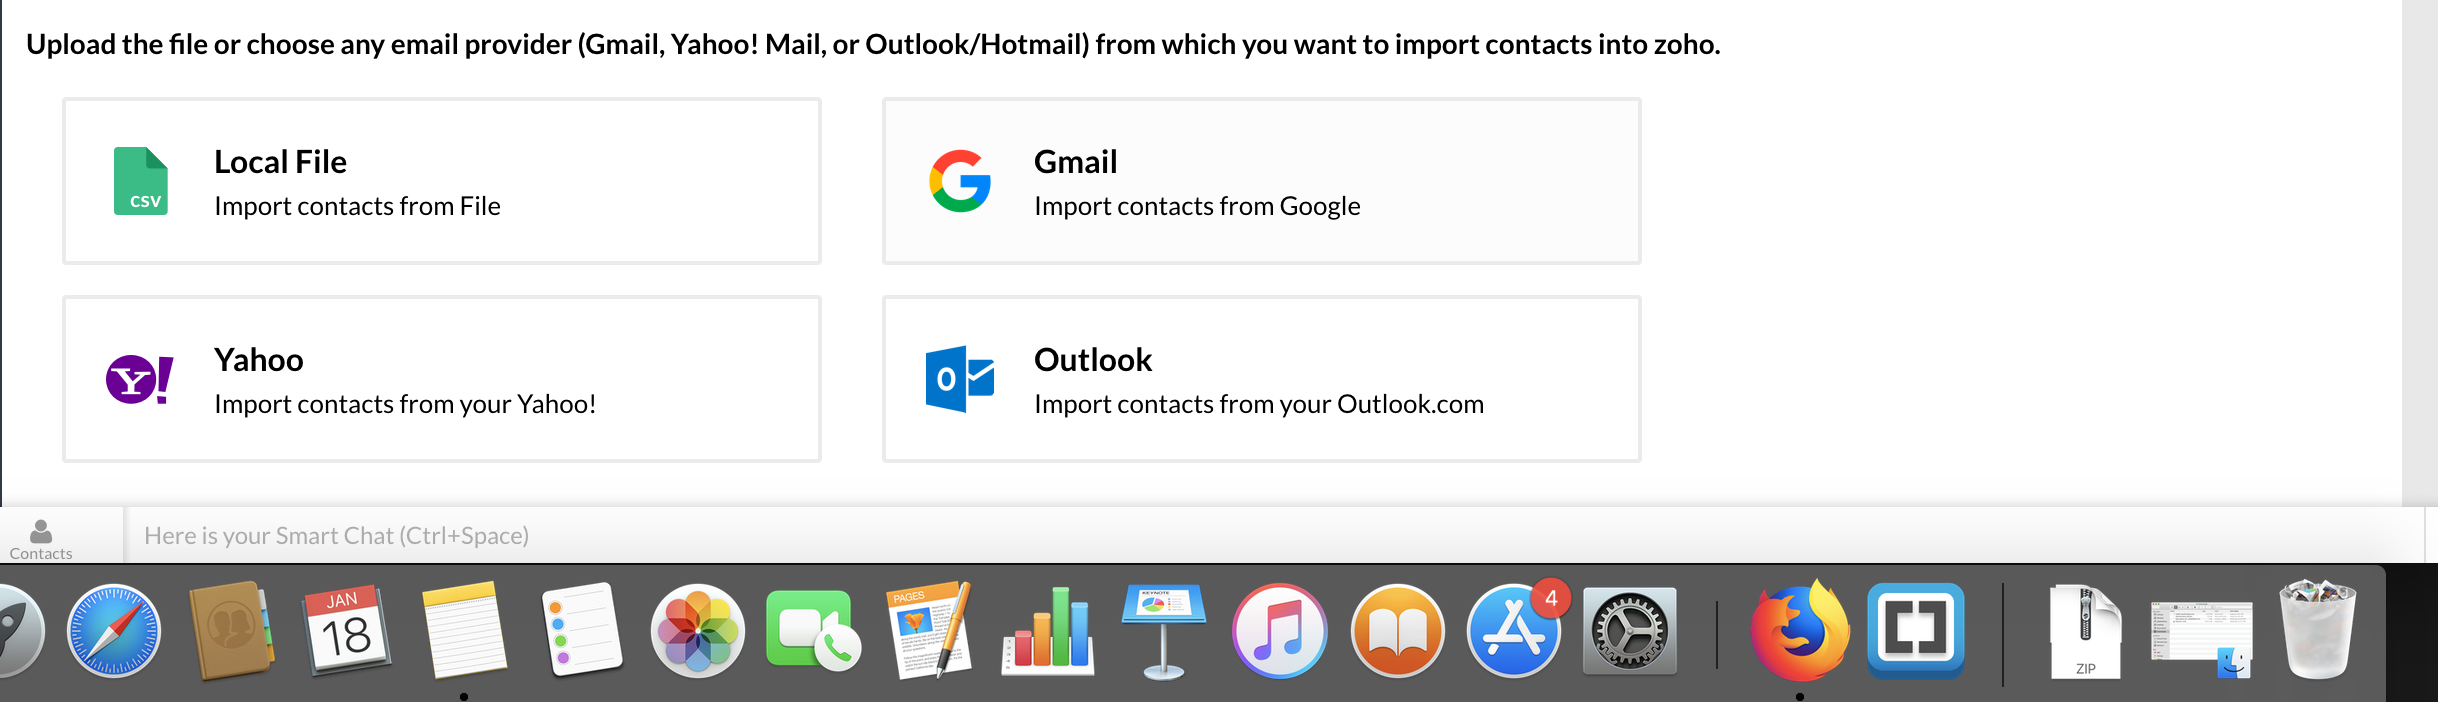 import contacts to outlook from gmail